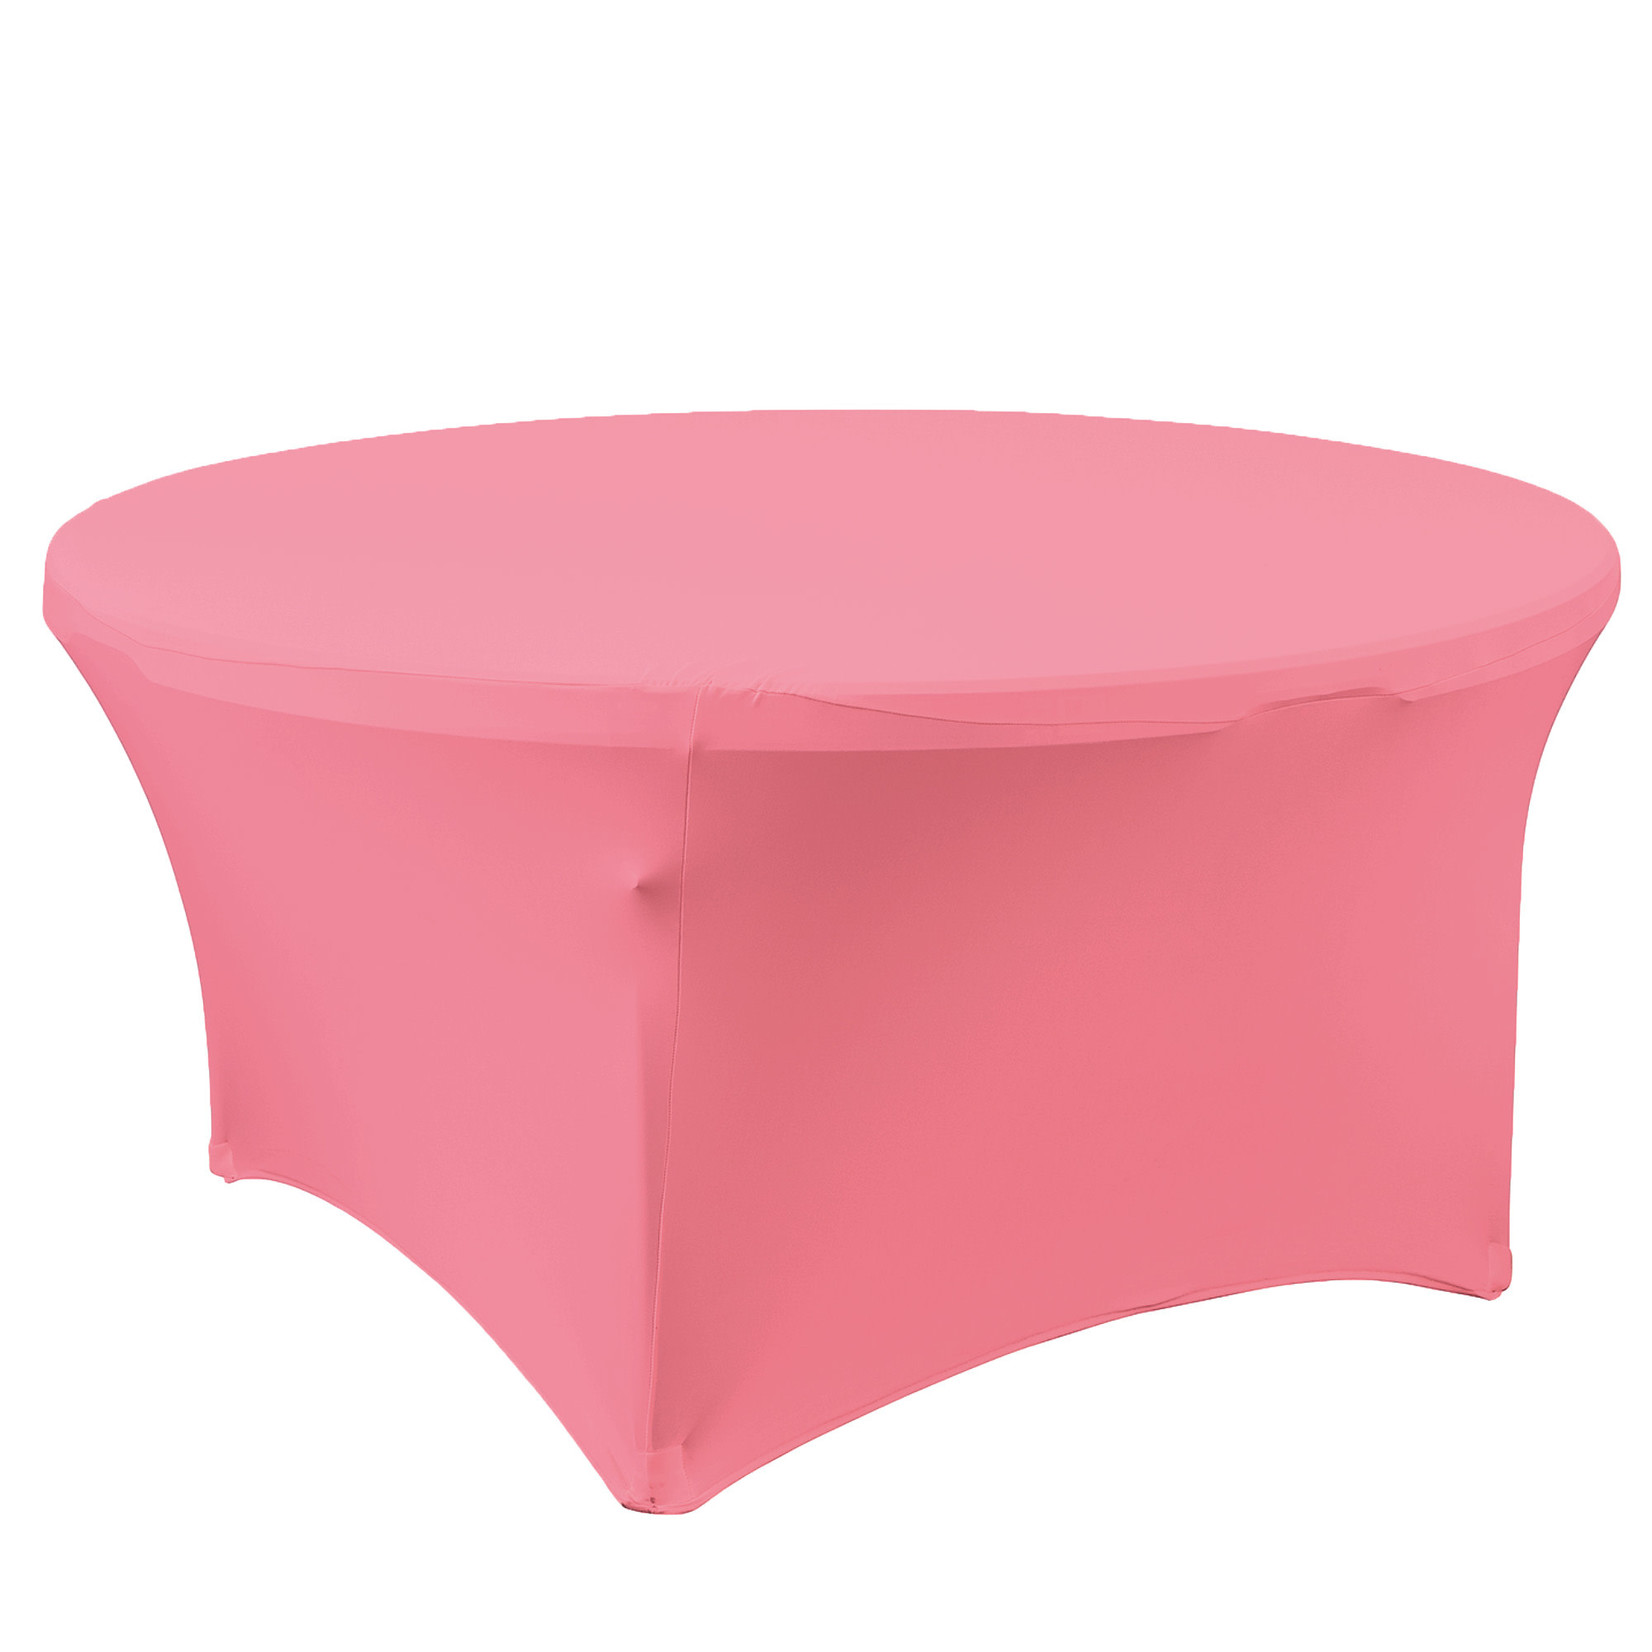 60'' ROUND PINK SPANDEX TABLE COVER